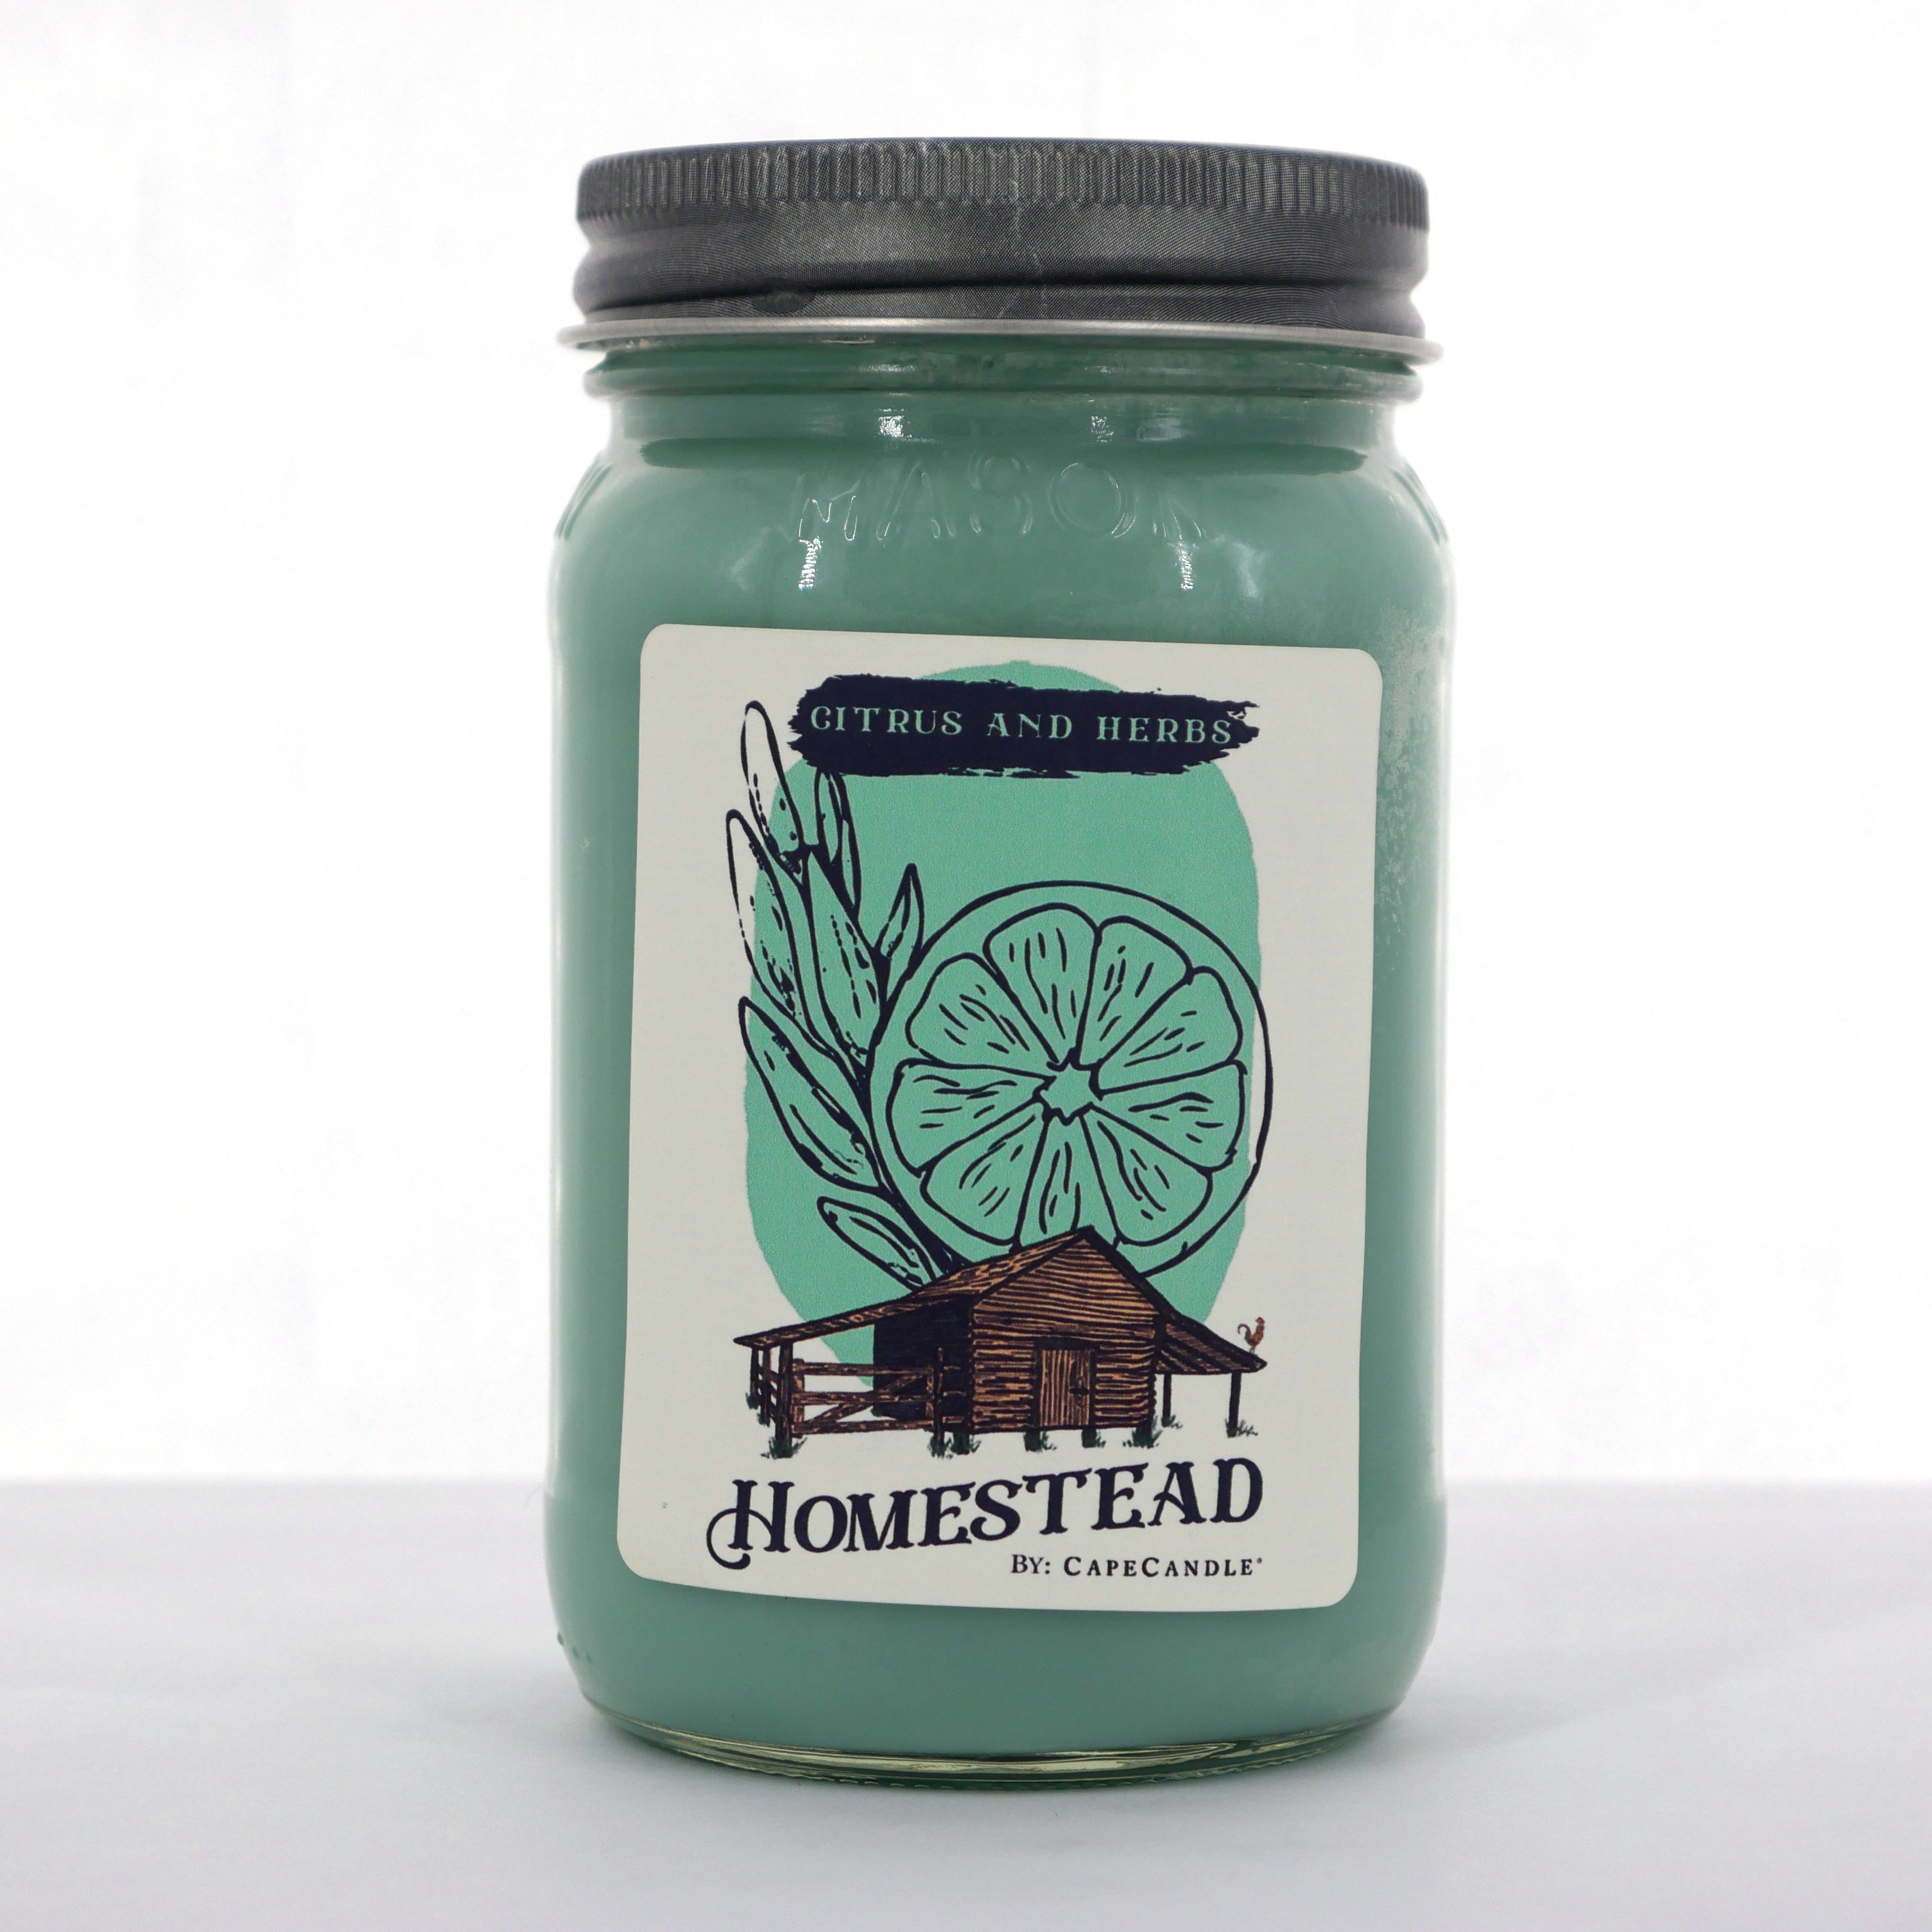 Citrus & Herbs Soy Candle 16oz Homestead Mason Jar by Cape Candle